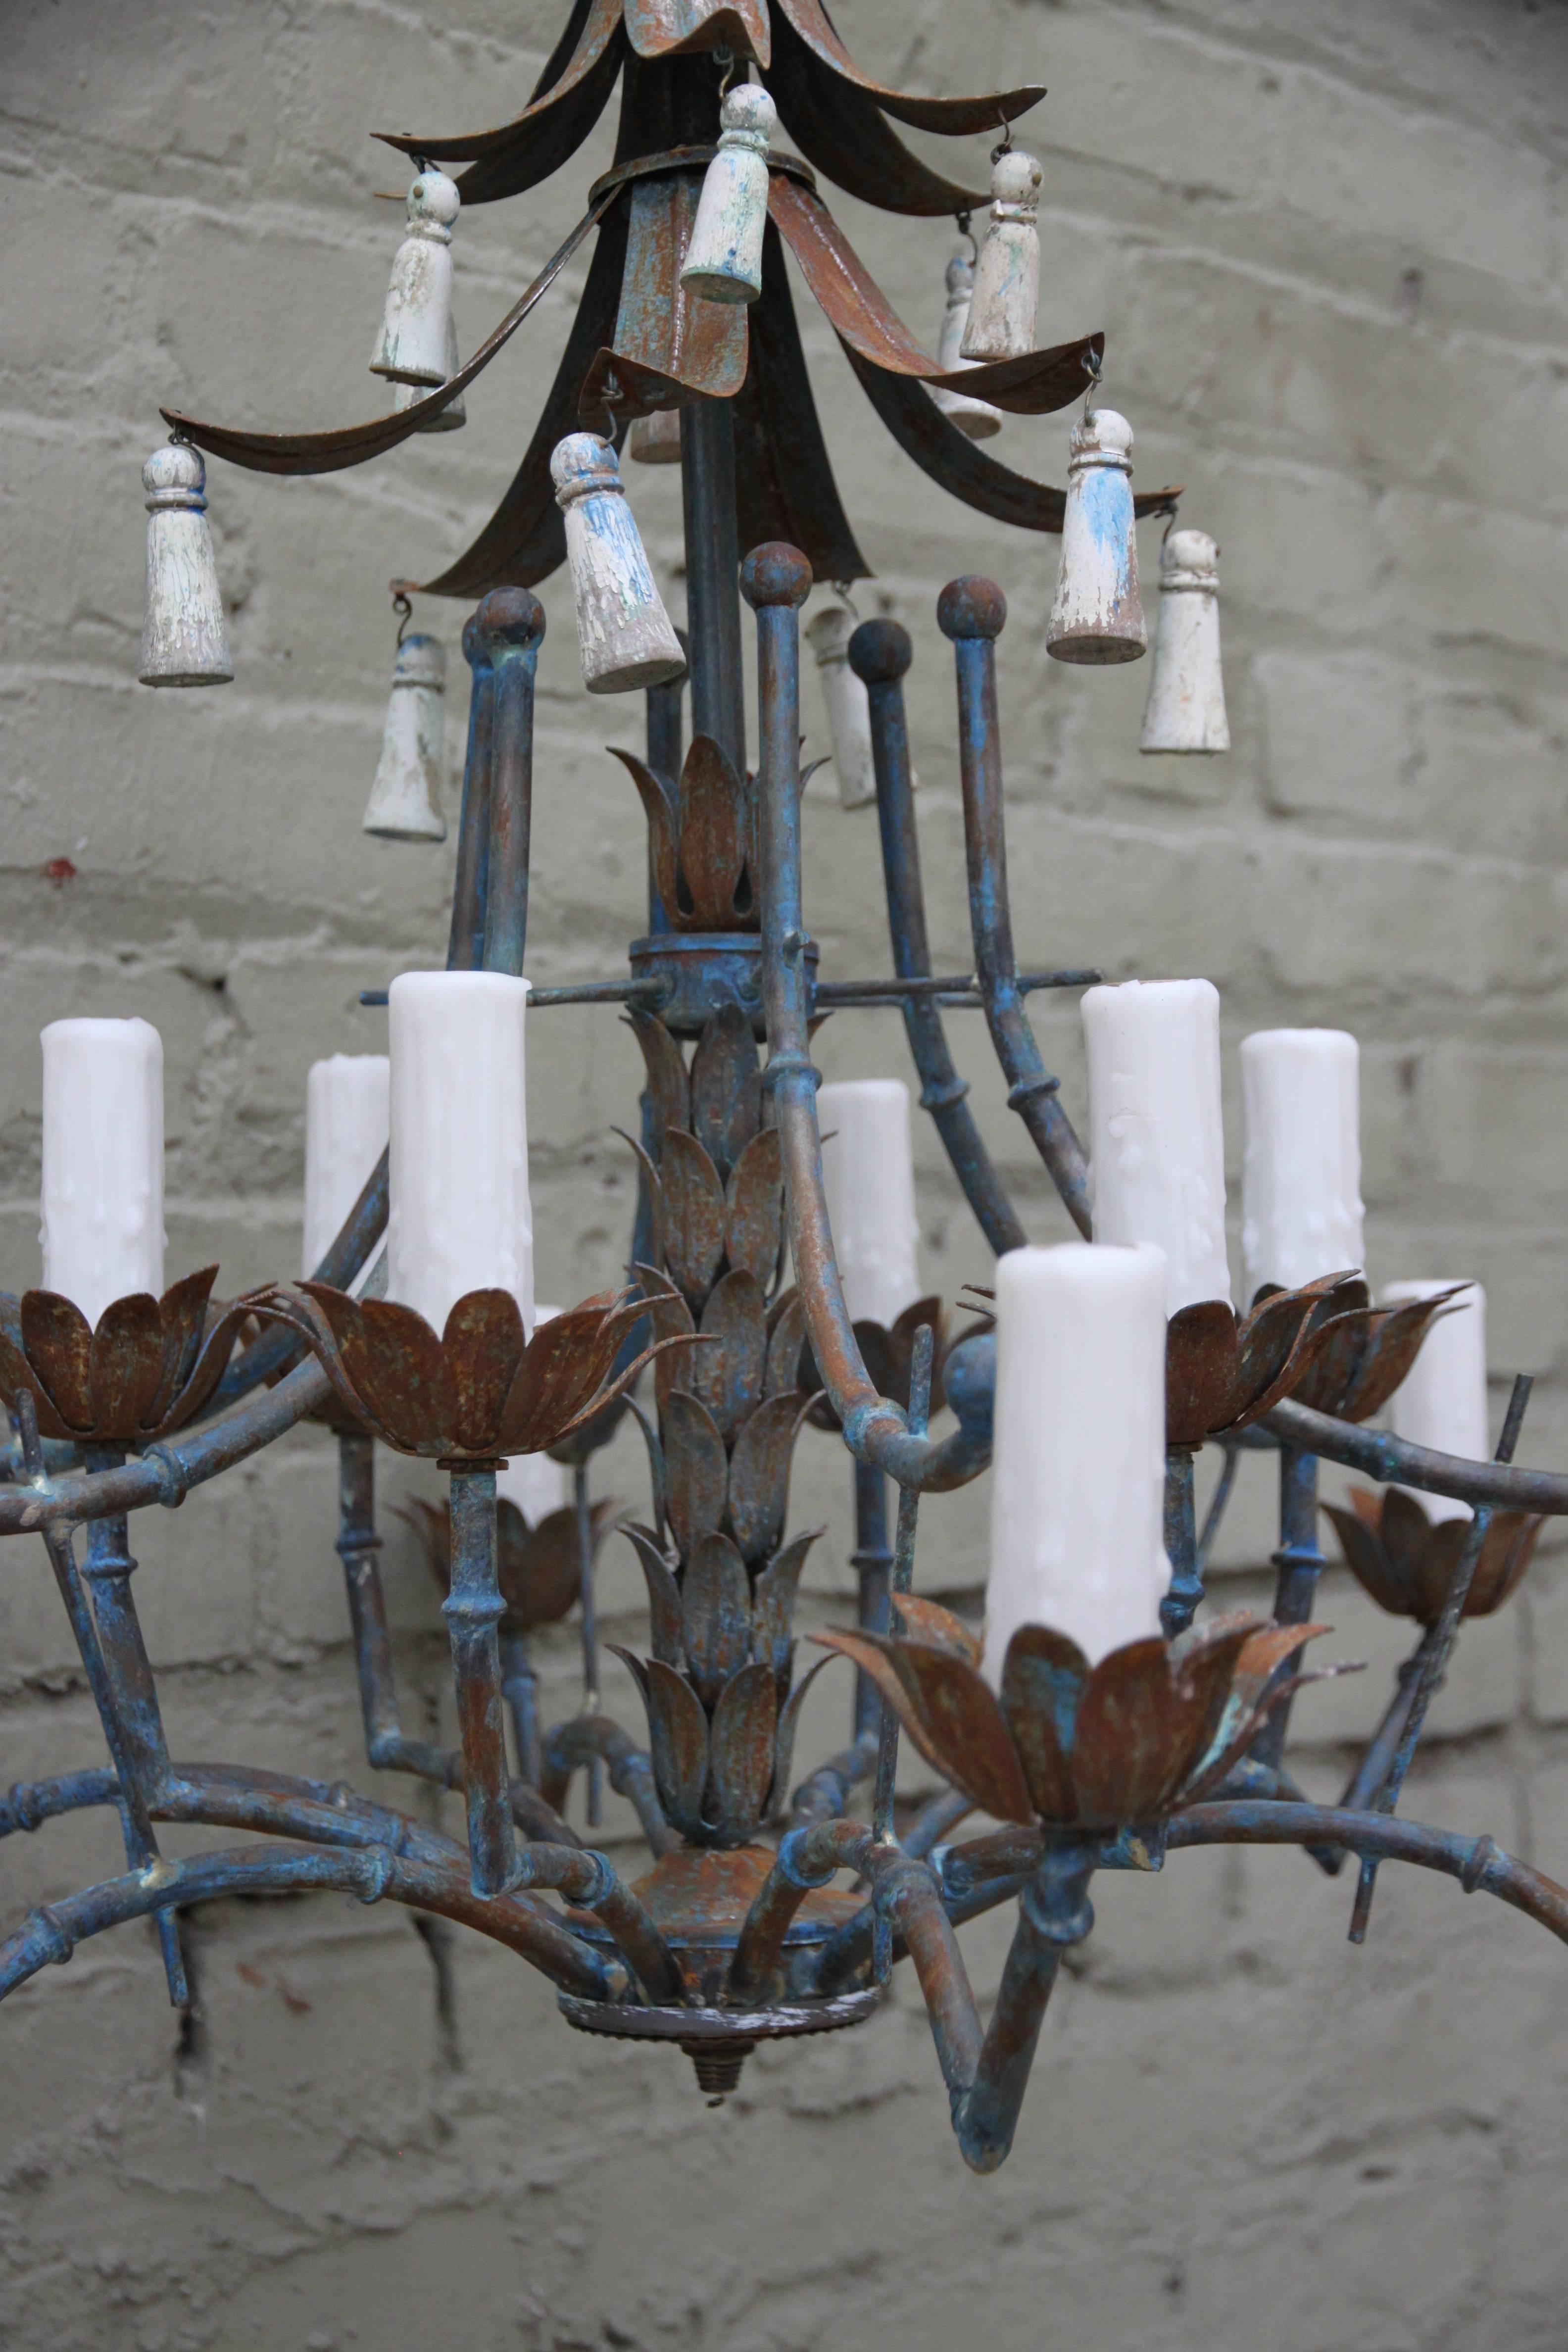 Italian (12) light Chinoiserie wrought iron chandelier w/ remnants of color throughout from original paint.